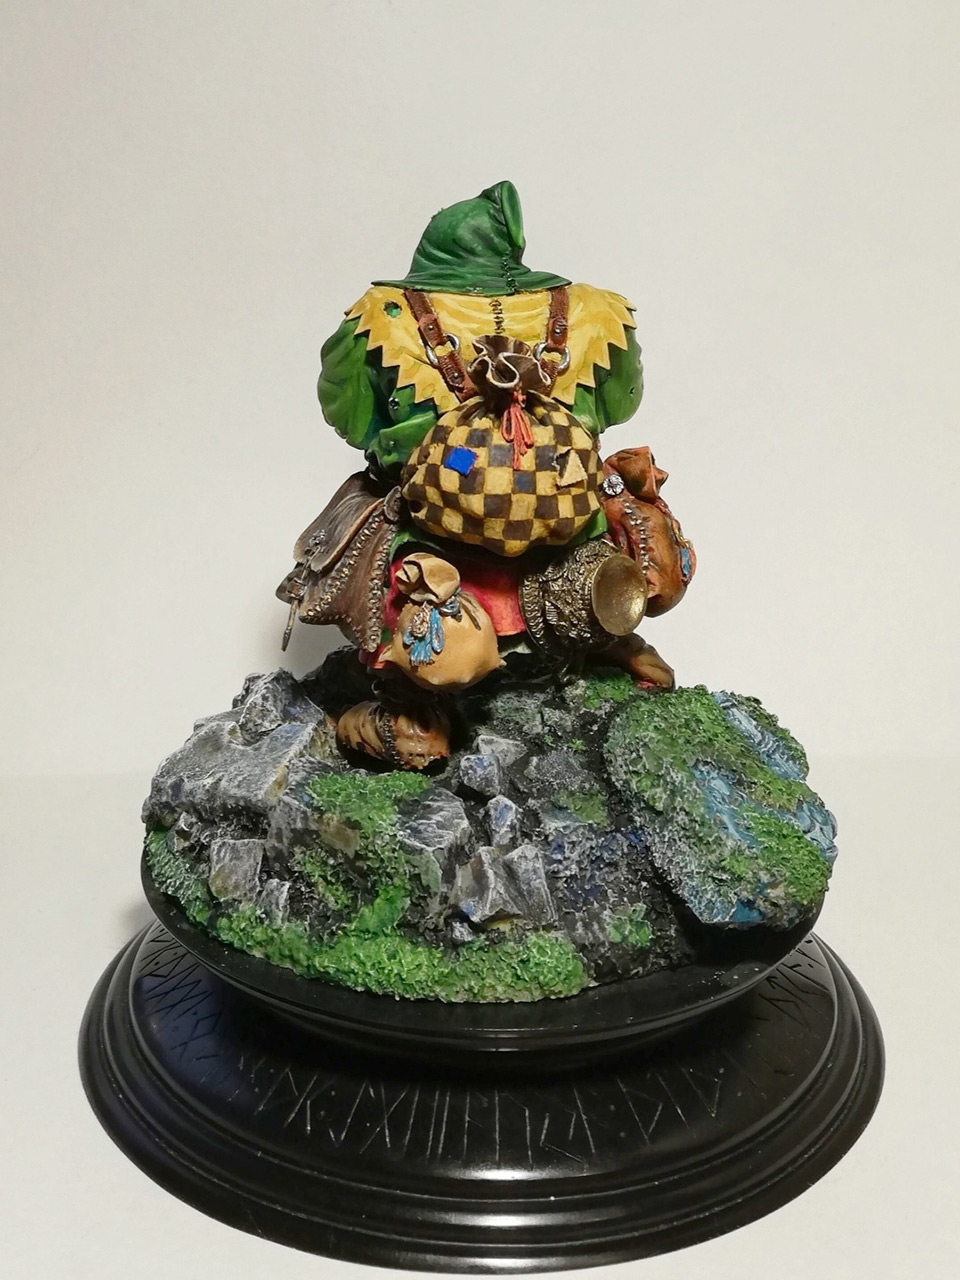 Miscellaneous: Dwarf the Grave Robber, photo #3